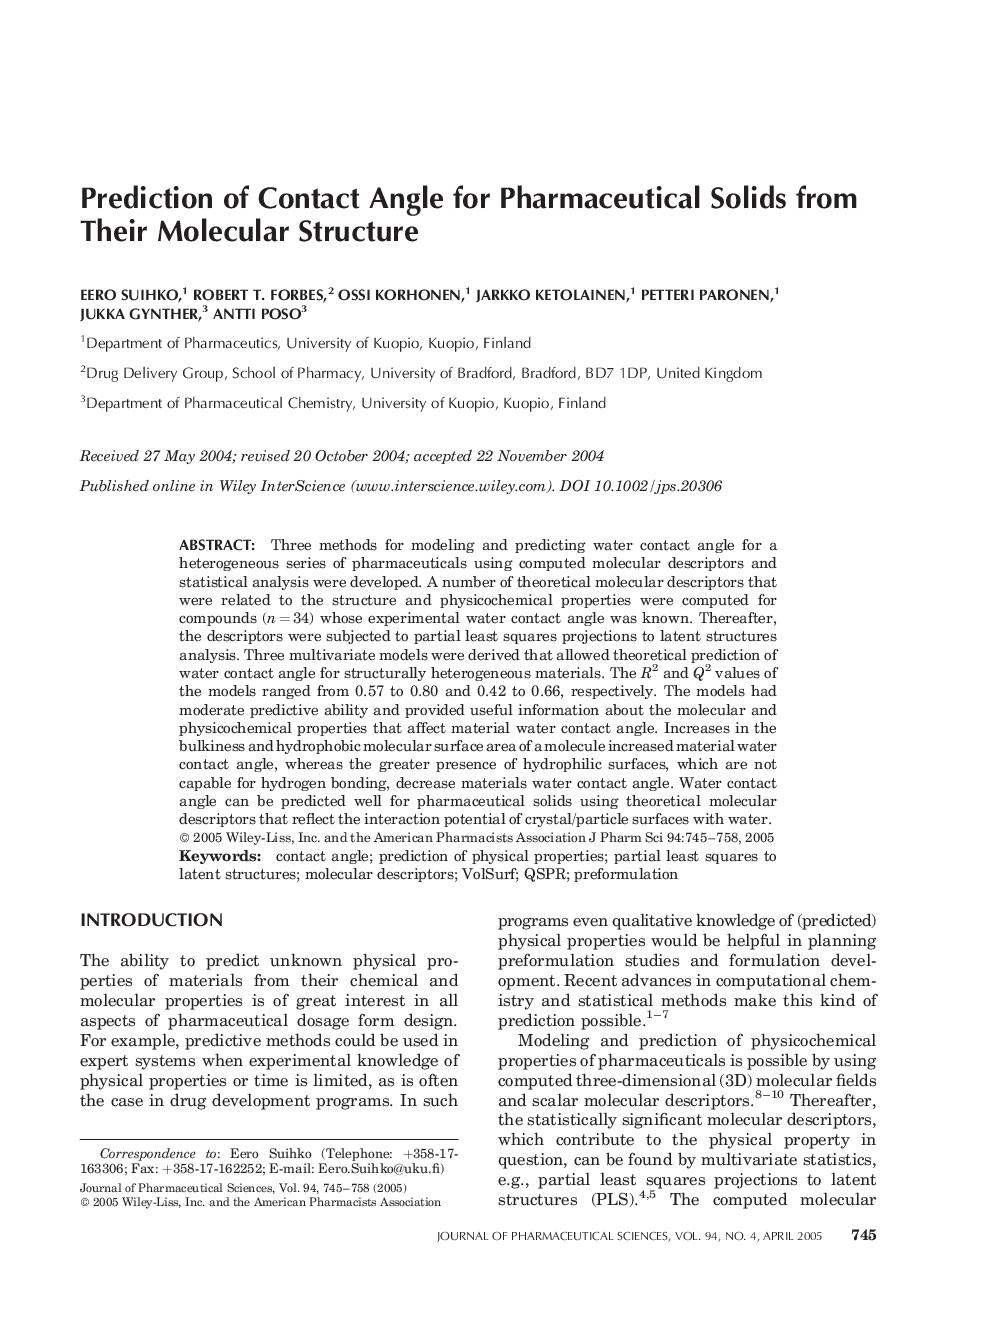 Prediction of Contact Angle for Pharmaceutical Solids from Their Molecular Structure